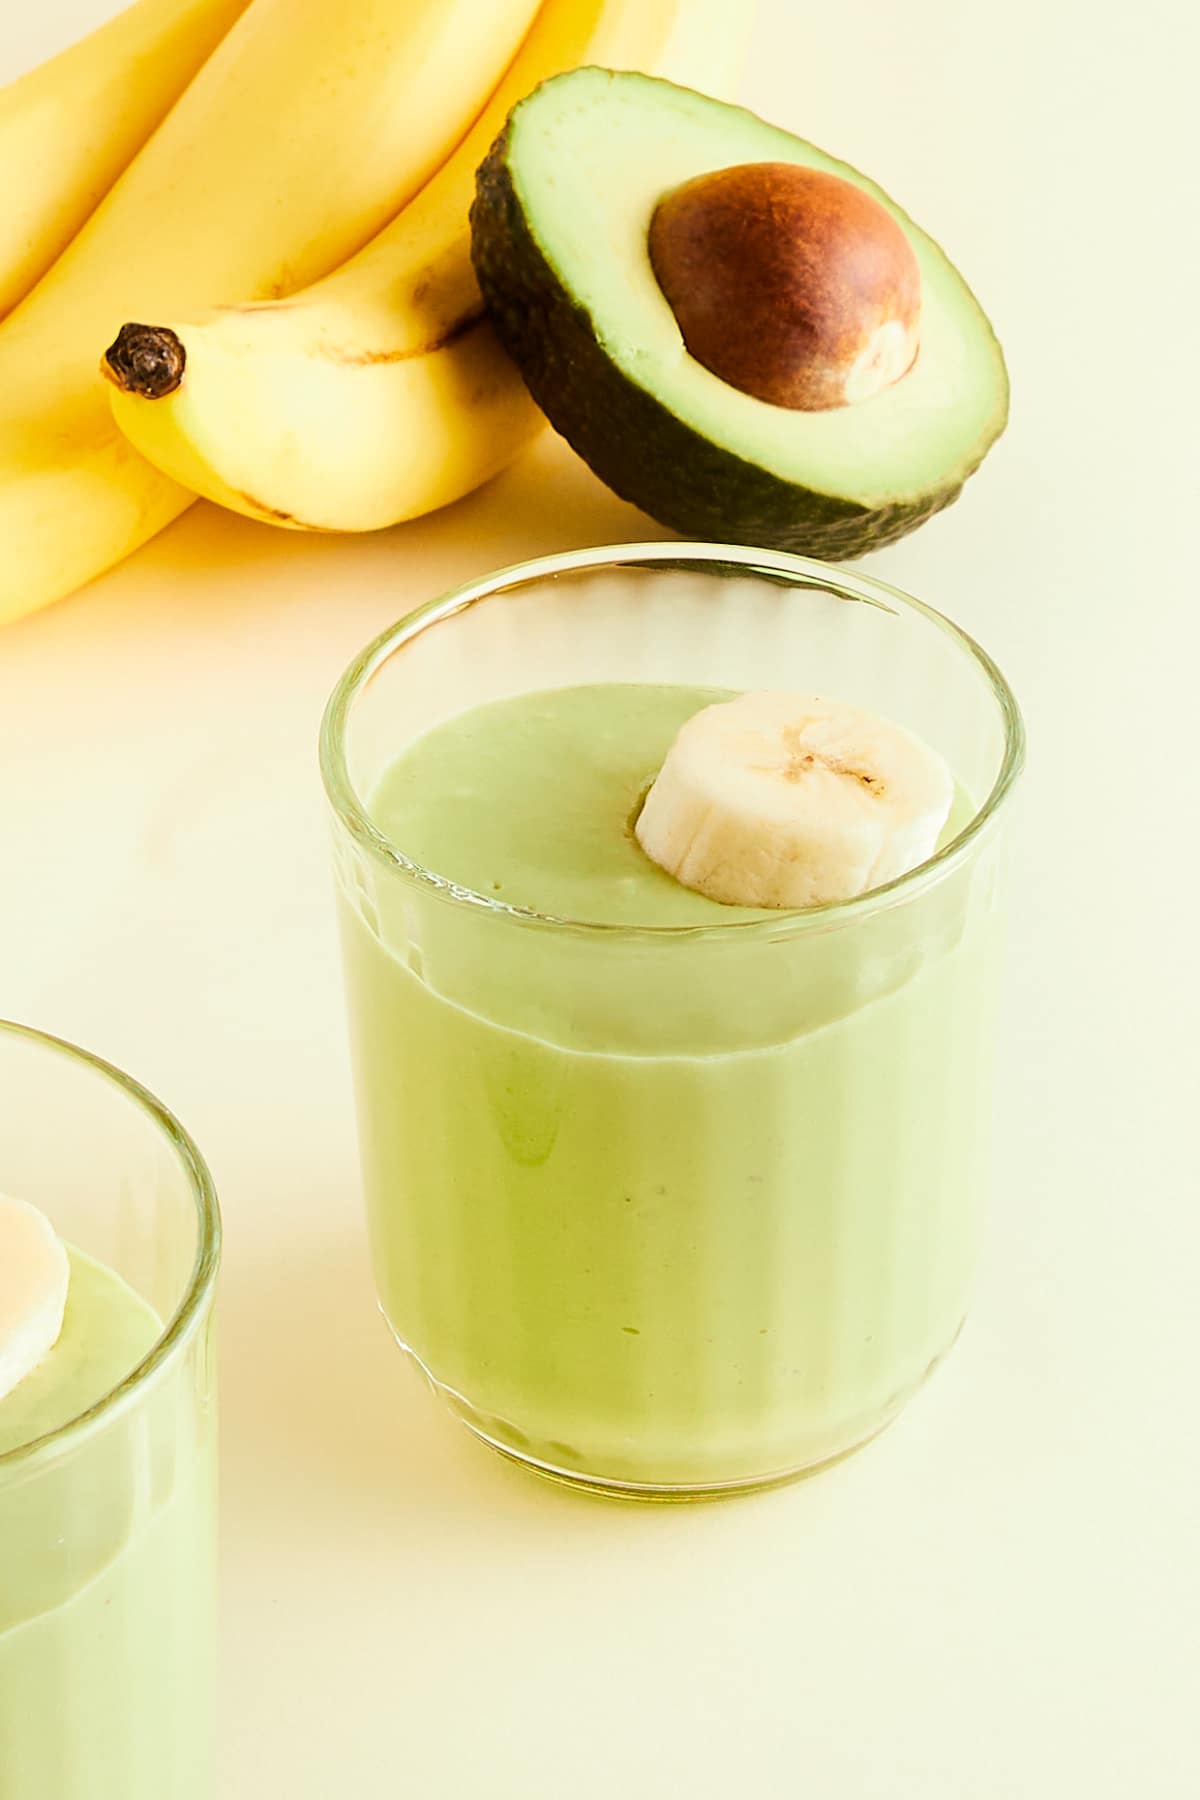 Two glasses of light green avocado smoothie garnished with banana slices. Whole bananas and a half avocado sit on the side.